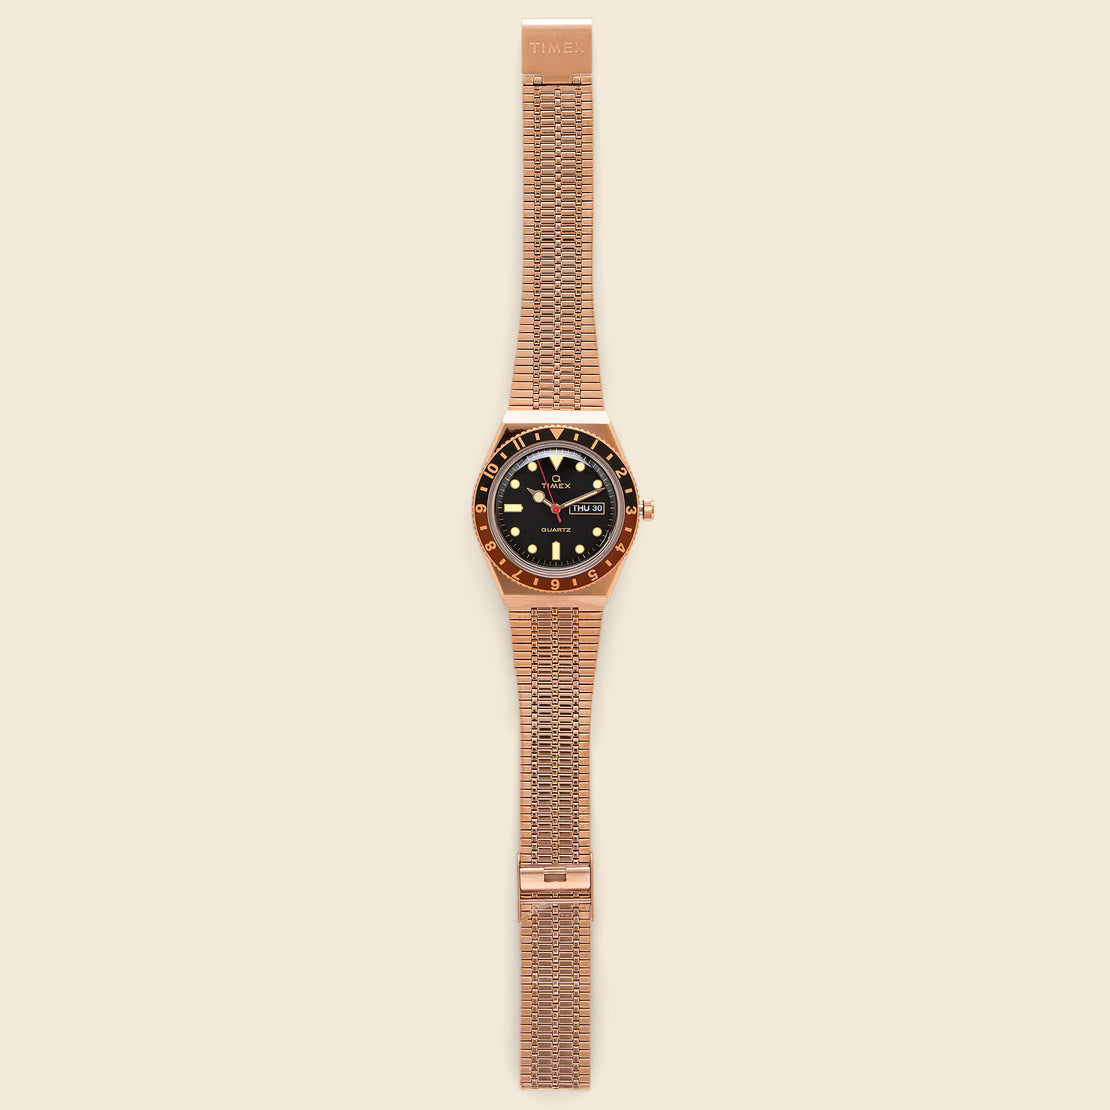 Q Stainless Steel Watch 38mm - Rose Gold Tone/Black